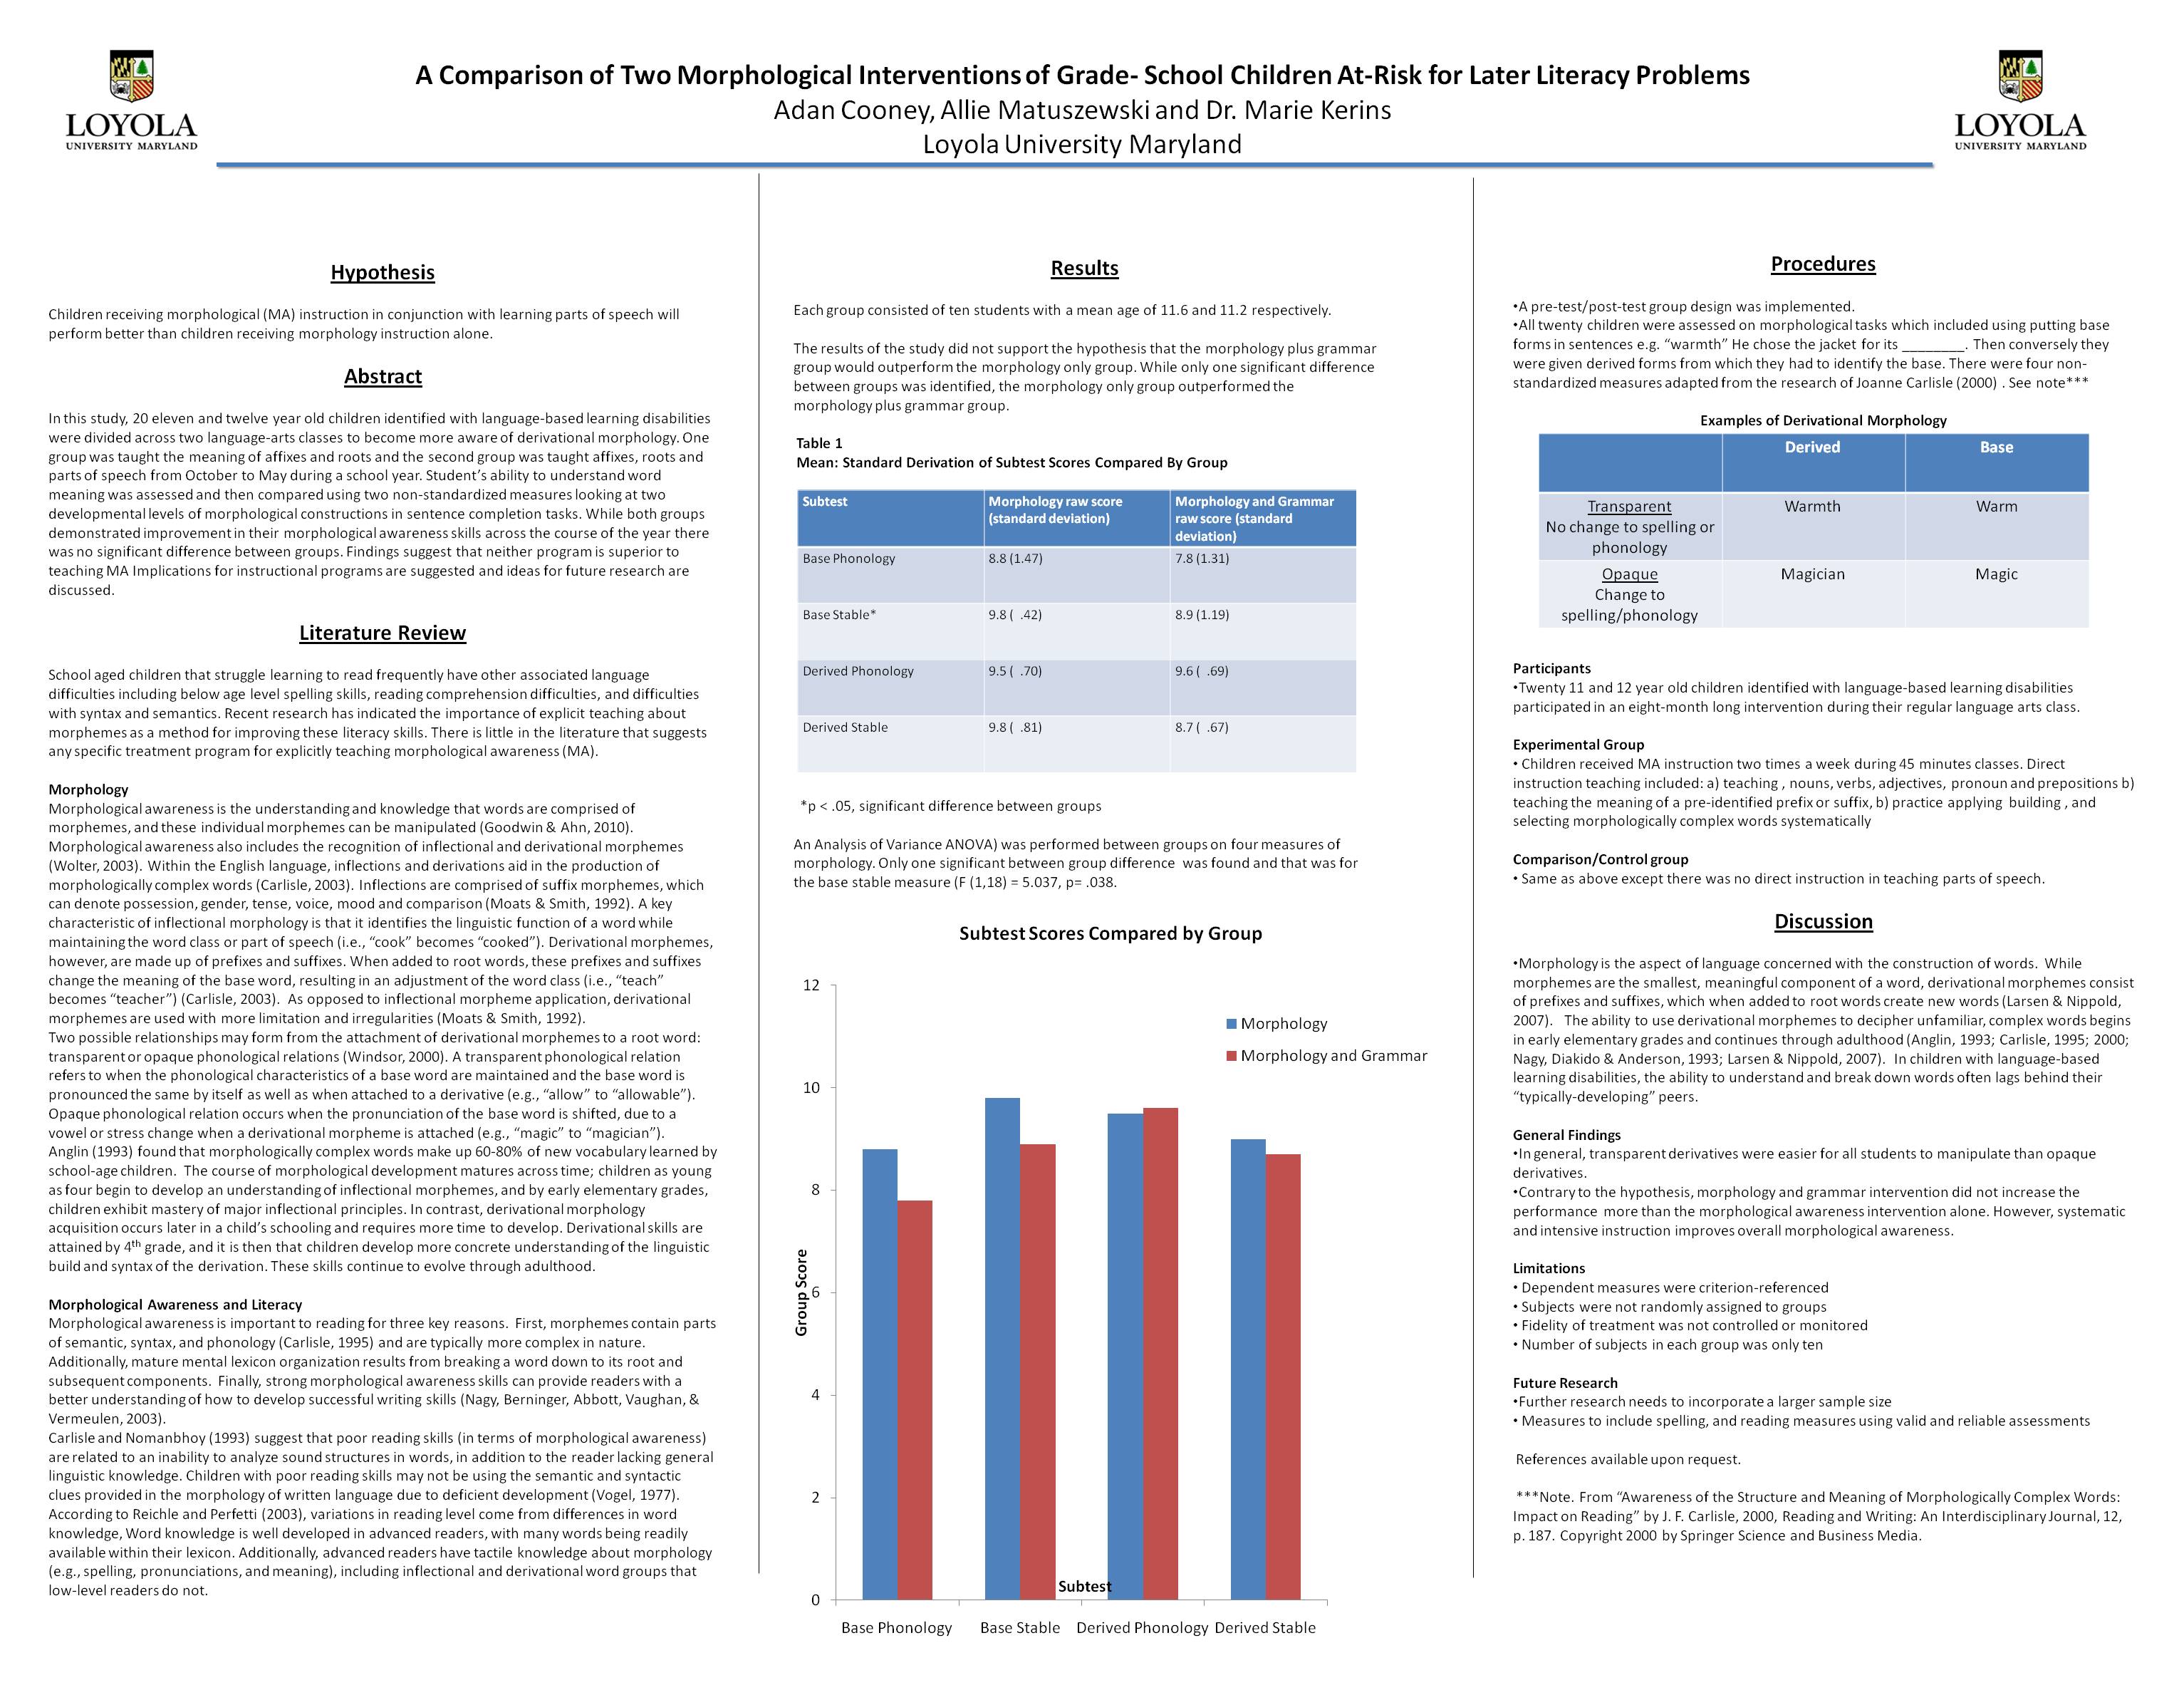 Poster image: Effects of Morphological Intervention on the Decoding and Encoding Skills of Early-Grade School Children At-Risk for Later Literacy Programs